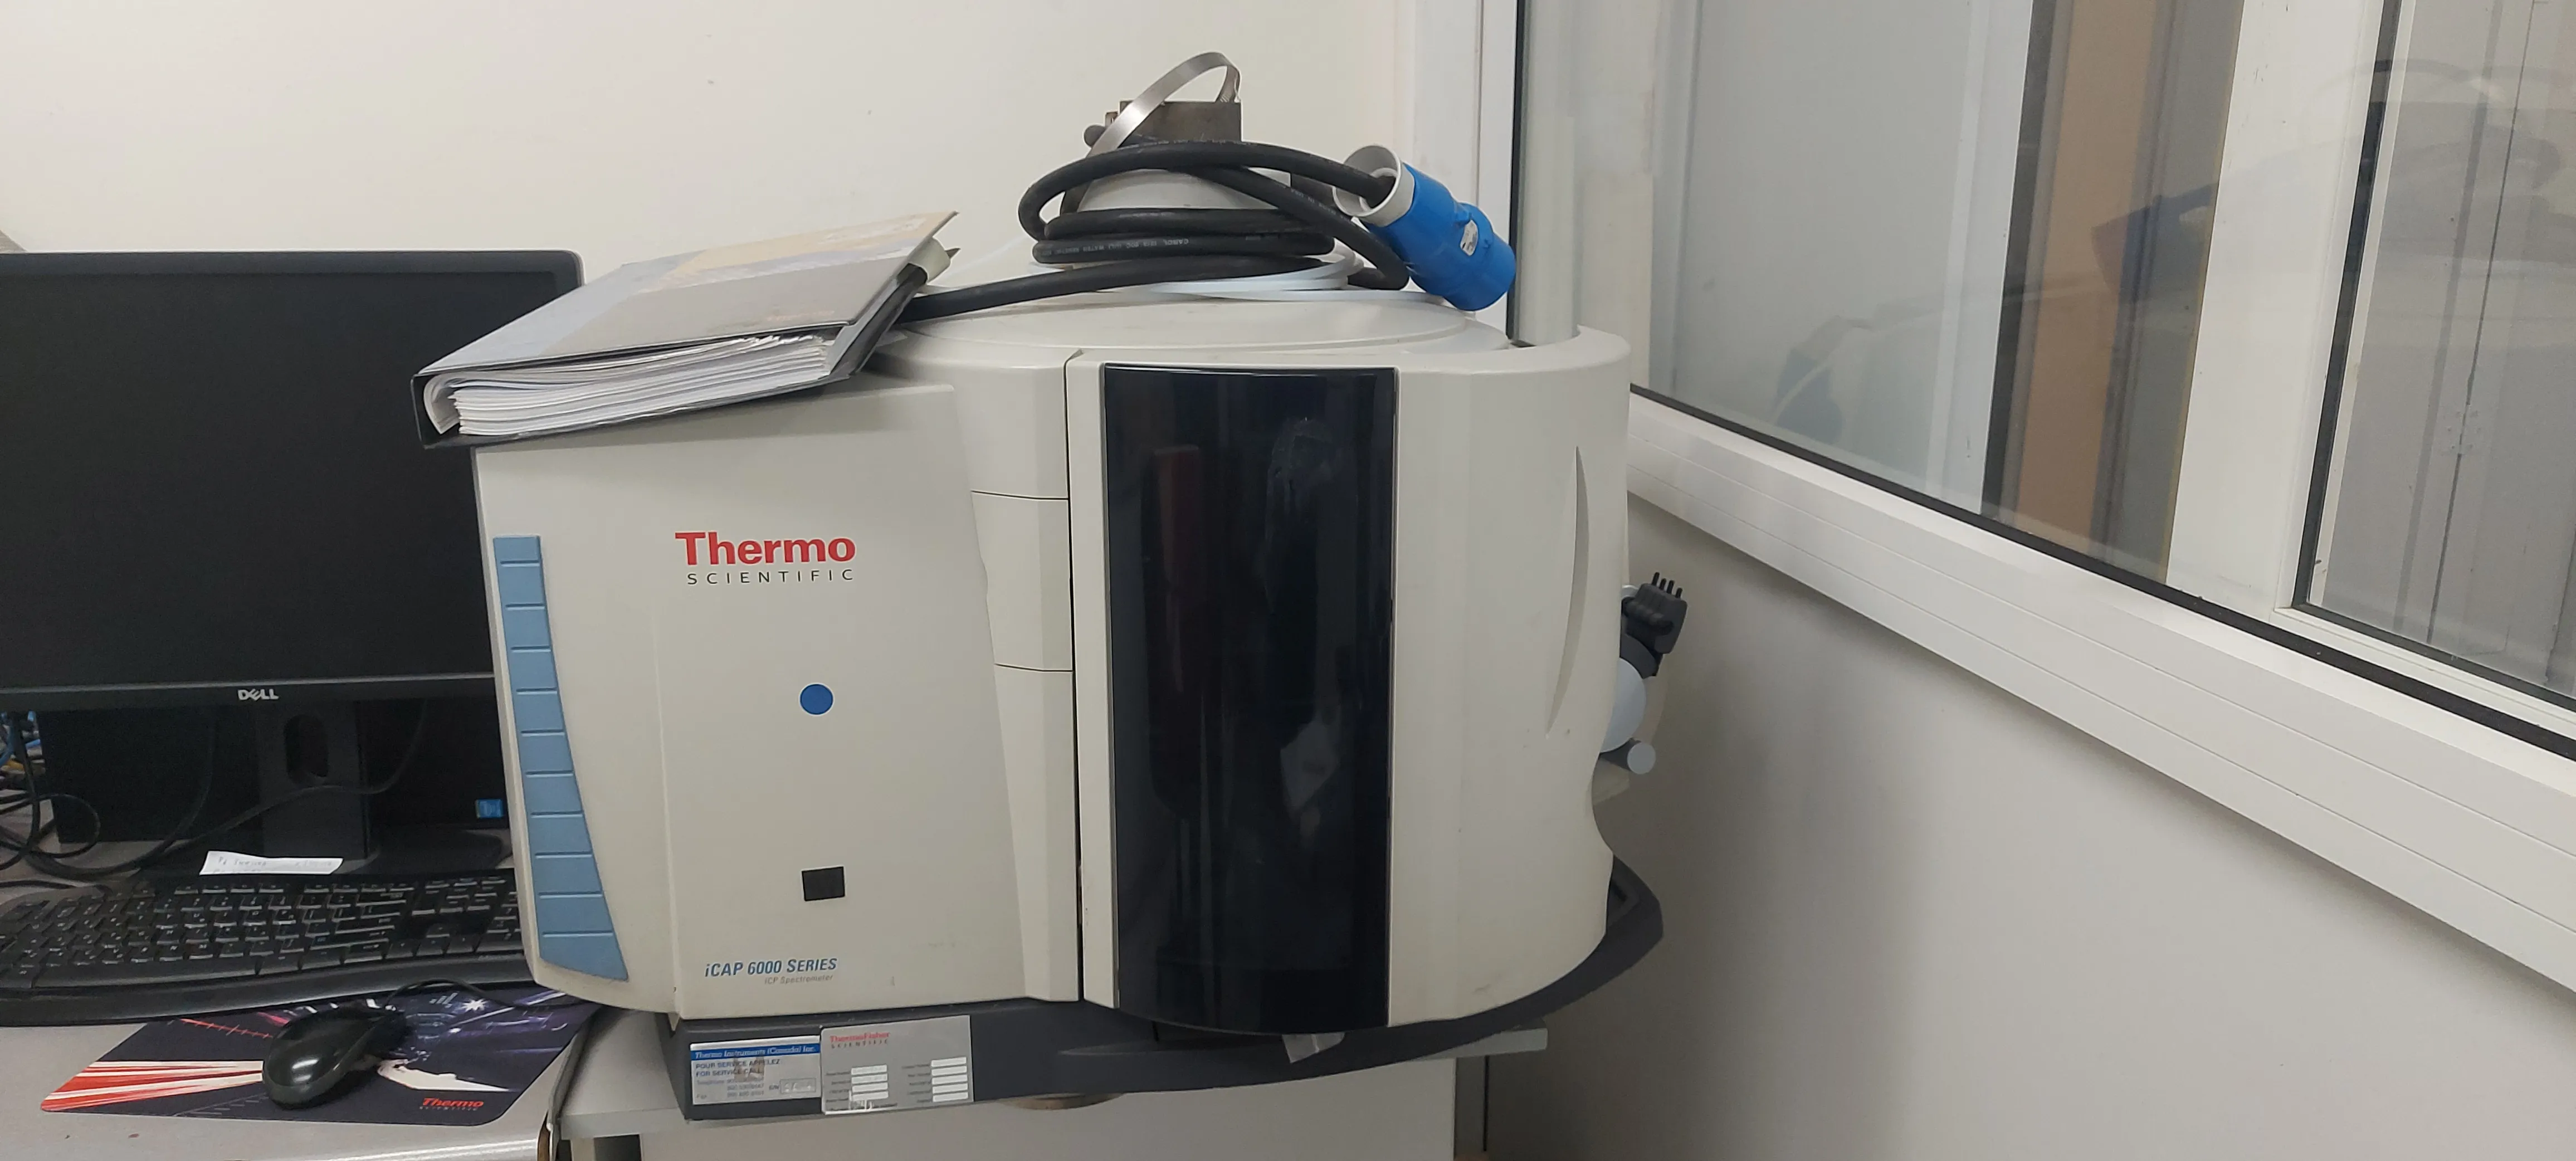 Thermo Fisher ICP OES ICAP 6000 Series (6500 Radial) Spectrometer 